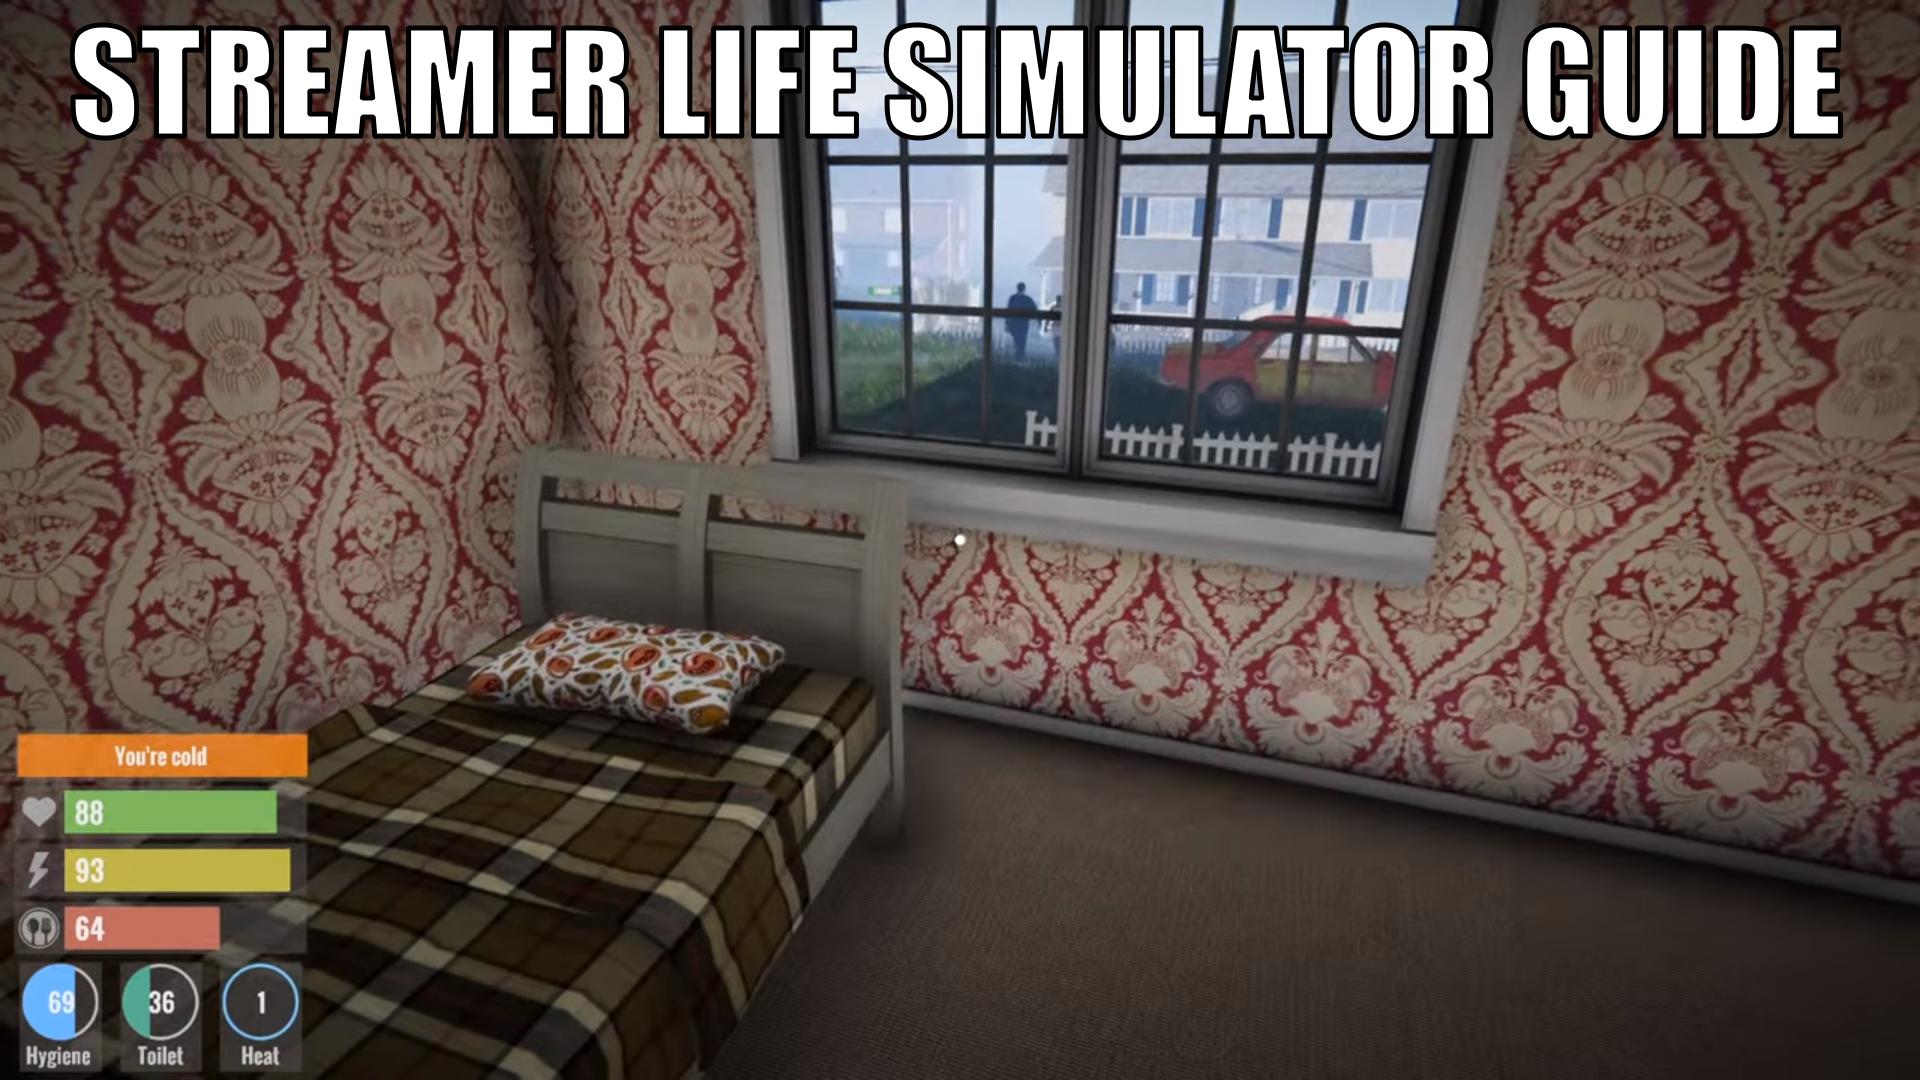 Streamer Life Simulator System Requirements